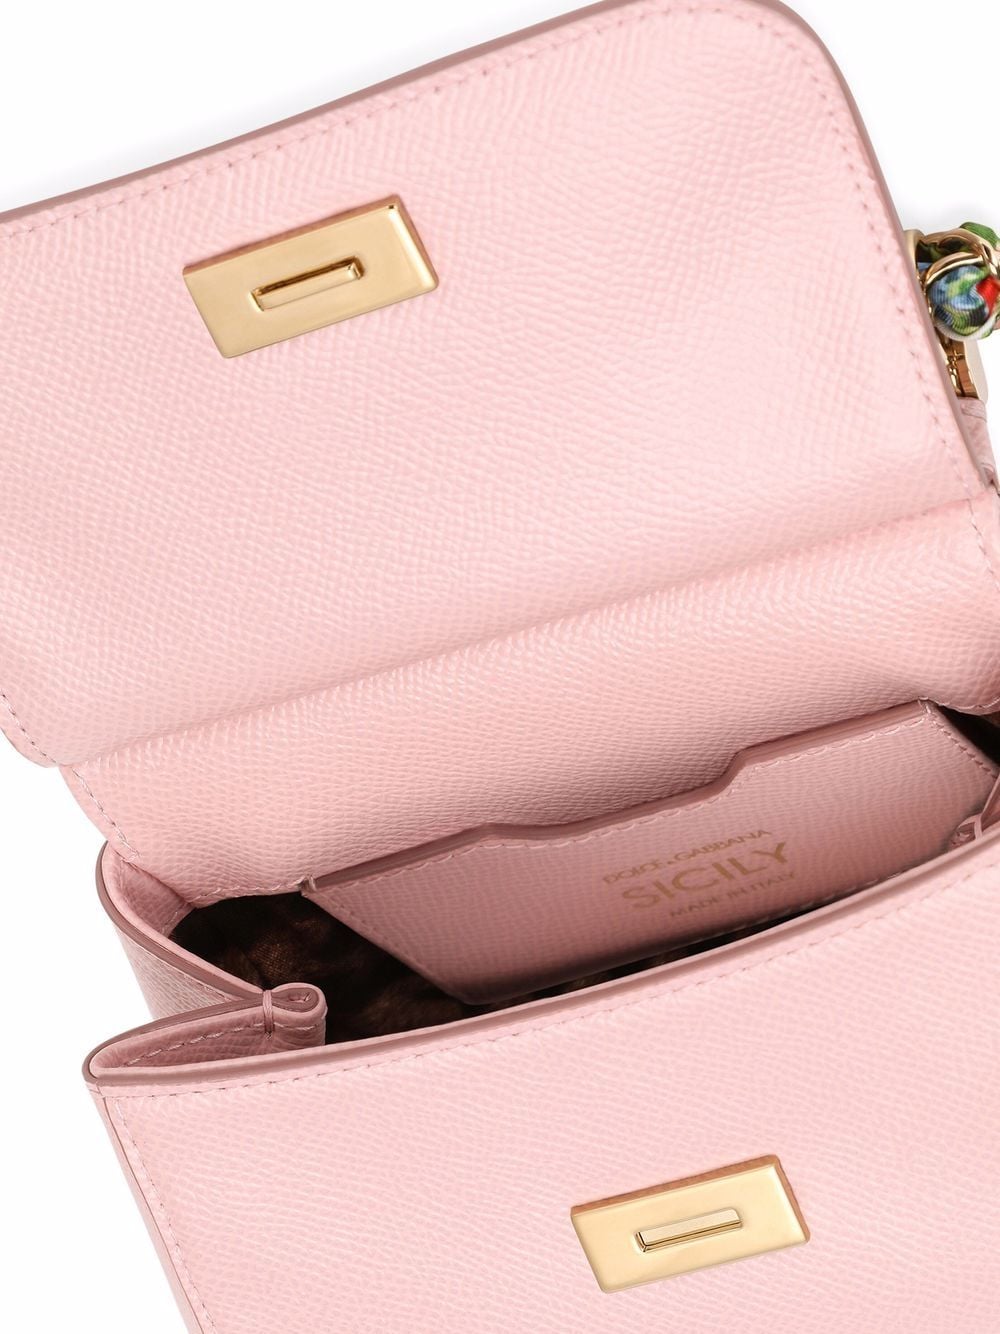 Dolce & Gabbana Sicily Mini Bag In Dauphine Calfskin With Scarf in Pink